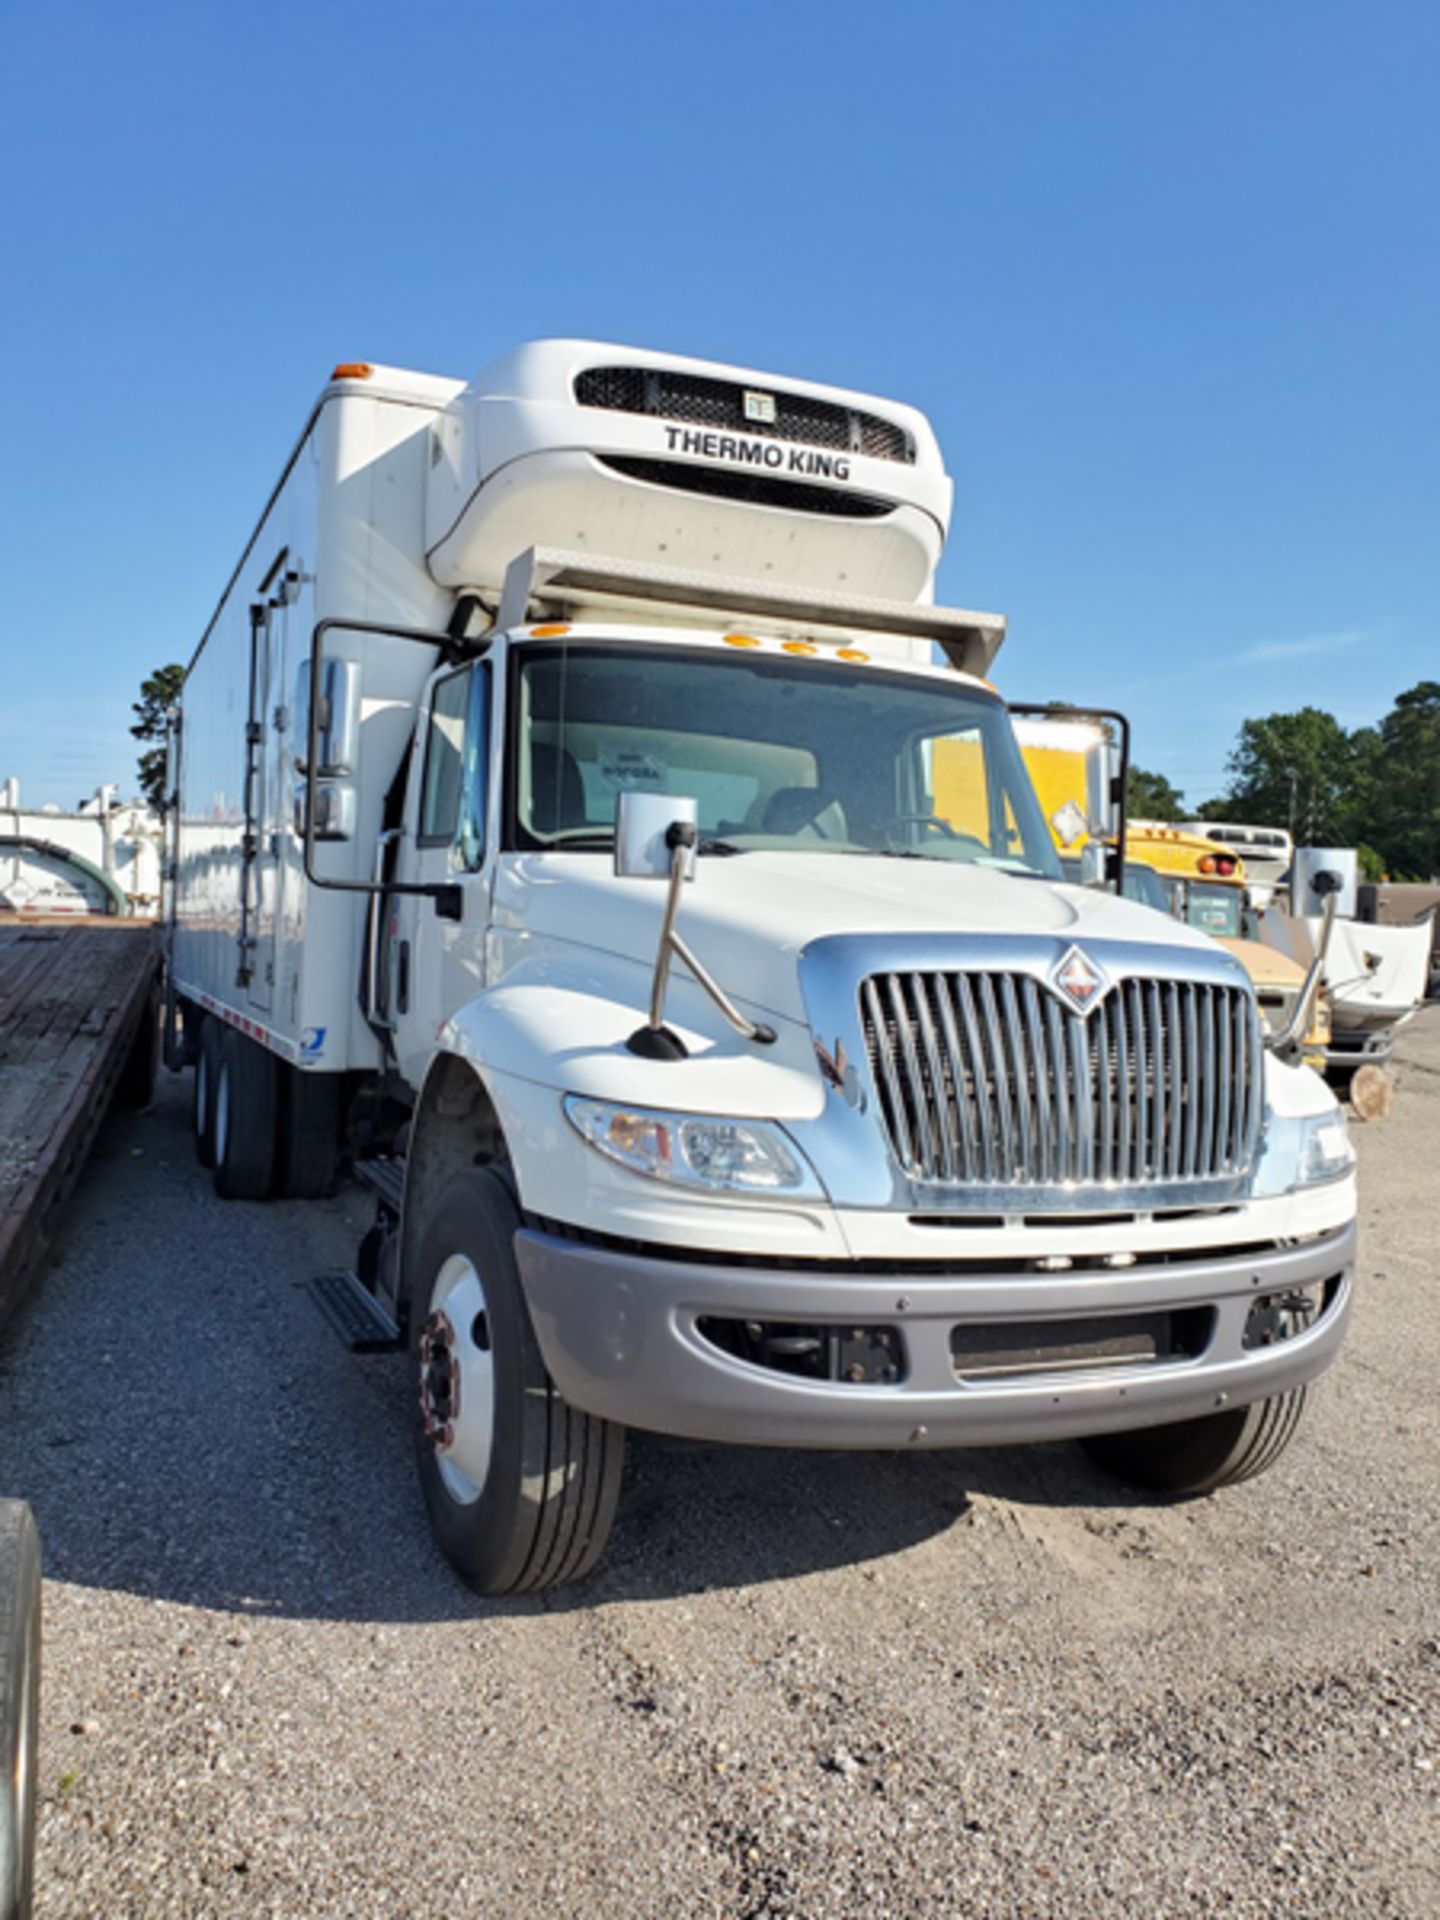 2018 INTERNATIONAL 4400 SBA 6X4 REFRIGERATED BOX TRUCK VIN#: 1HTMSTAR0JH529612, Approx Miles: 65918, - Image 2 of 8